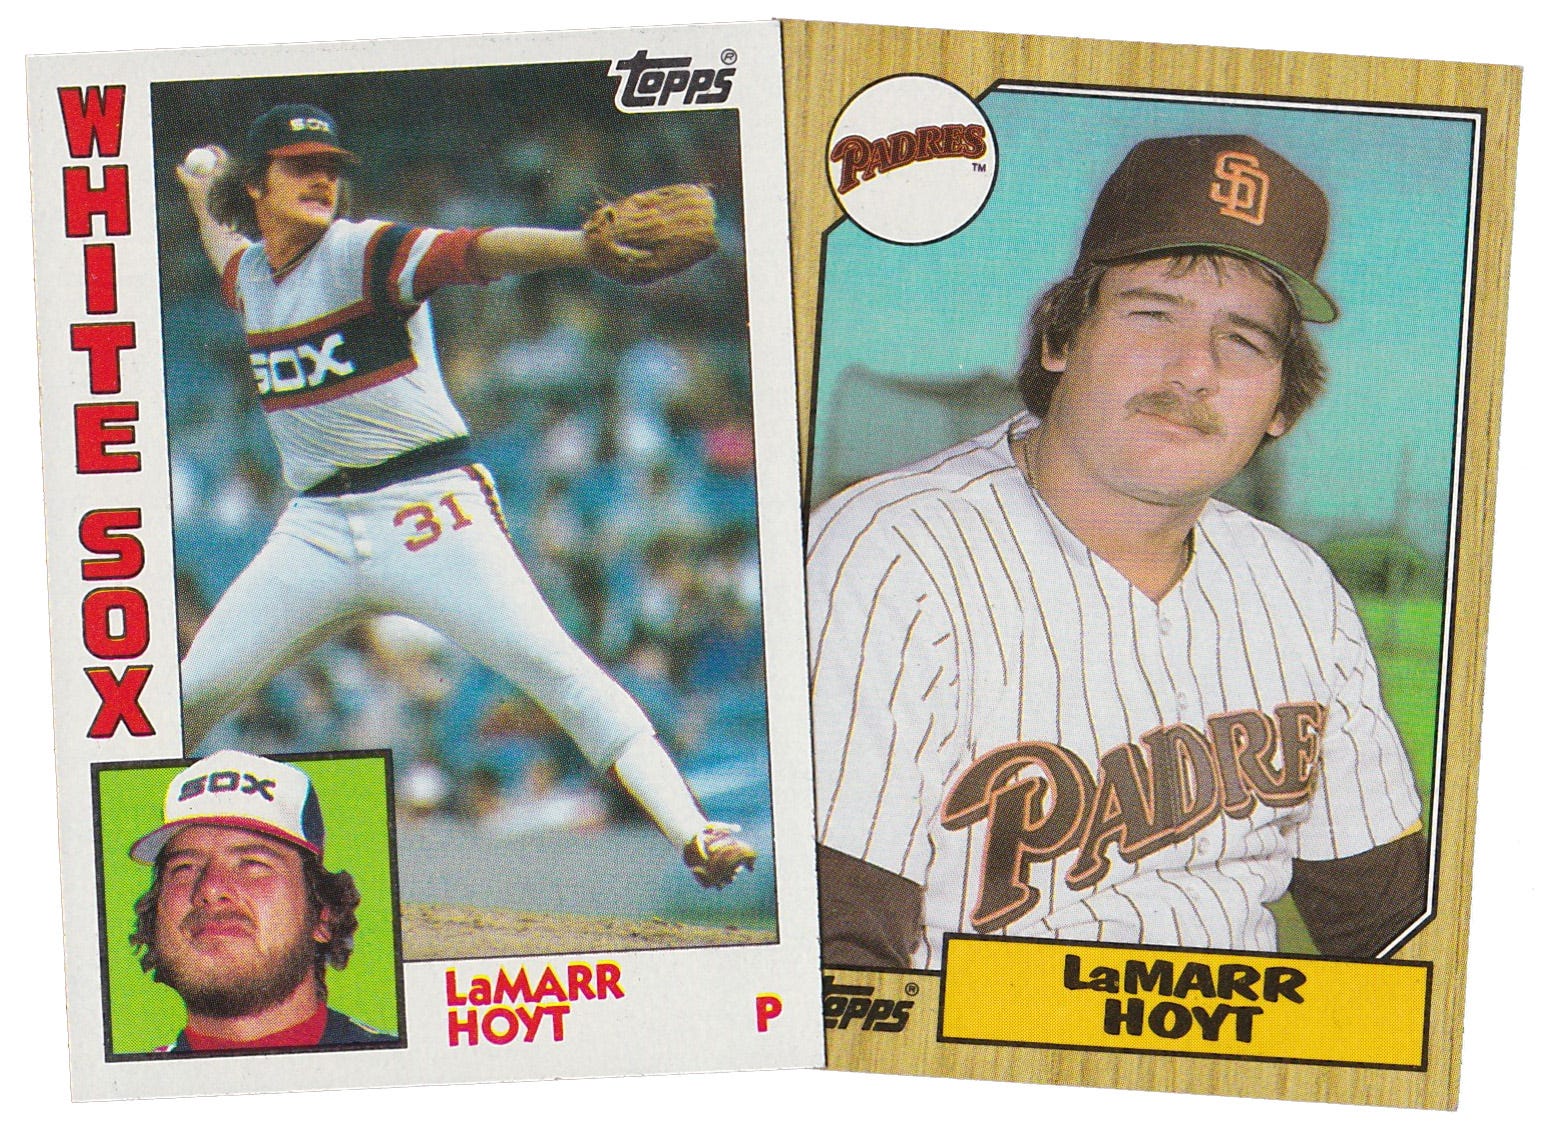 White Sox 1983 Cy Young Winner Lamarr Hoyt Dies Of Cancer At 66